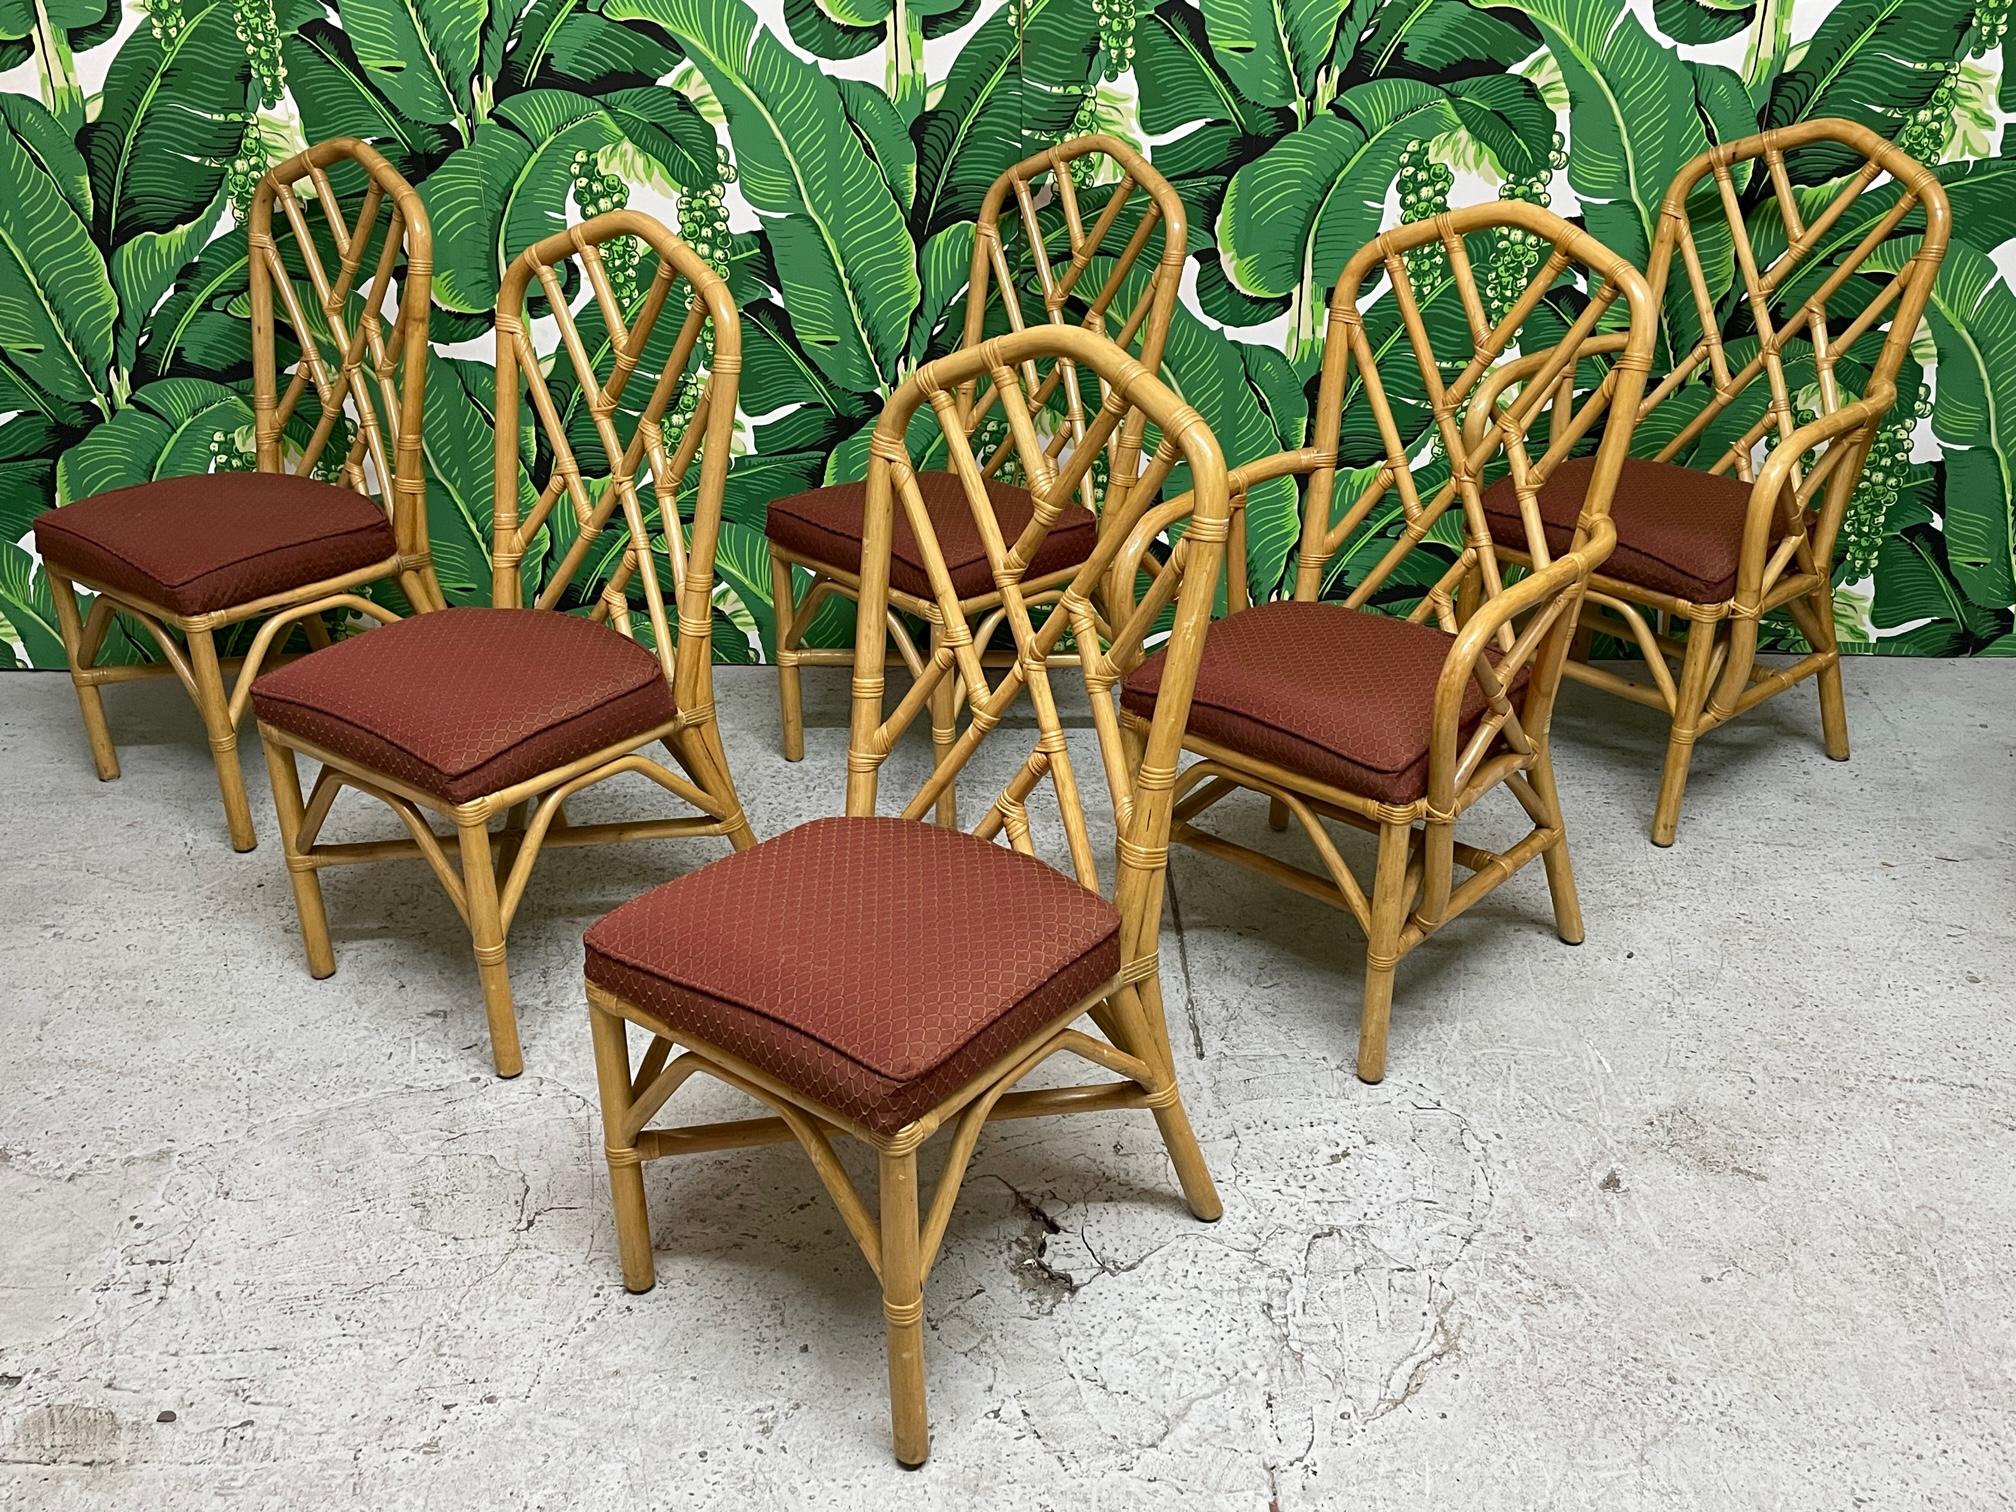 Set of six rattan dining chairs feature Chinese Chippendale style fretwork, splayed rear legs, and cushioned seats. Good vintage condition with minor imperfections consistent with age, see photos for condition details. 
For a shipping quote to your